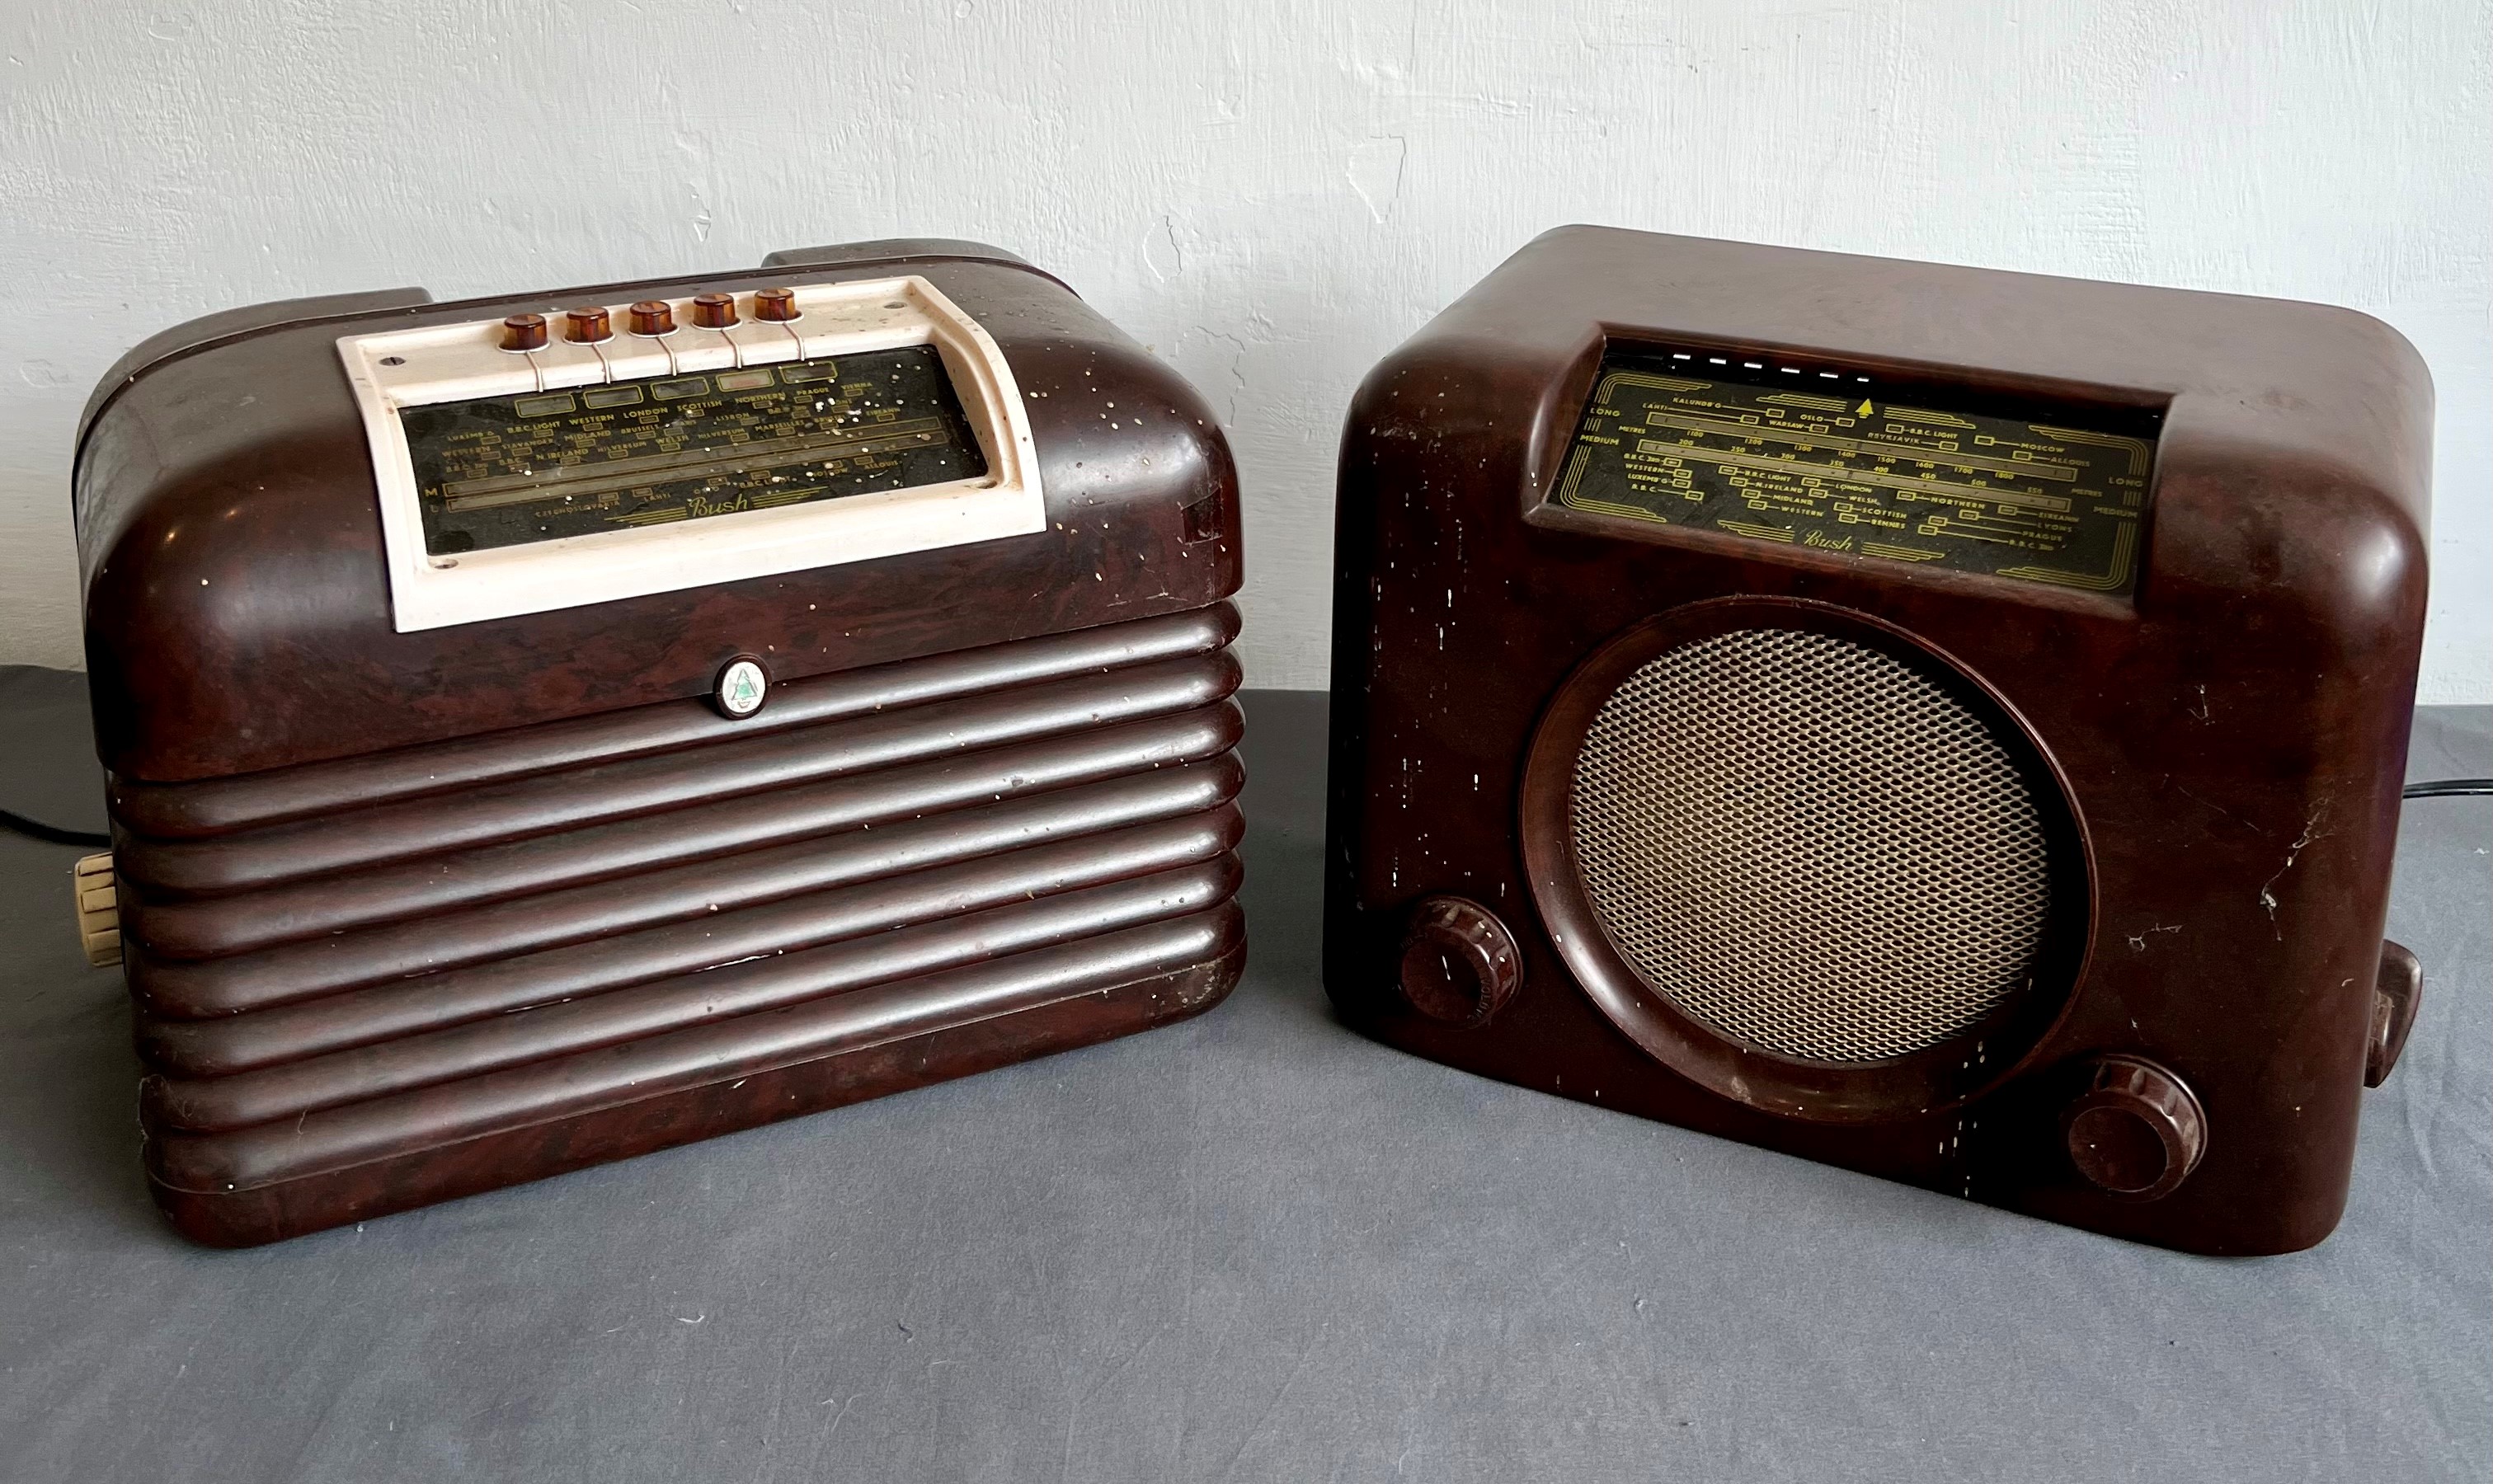 Two Bush bakelite radios - 1950s, comprising a DAC 90A and a DAC 10, both with brown bakelite cases,